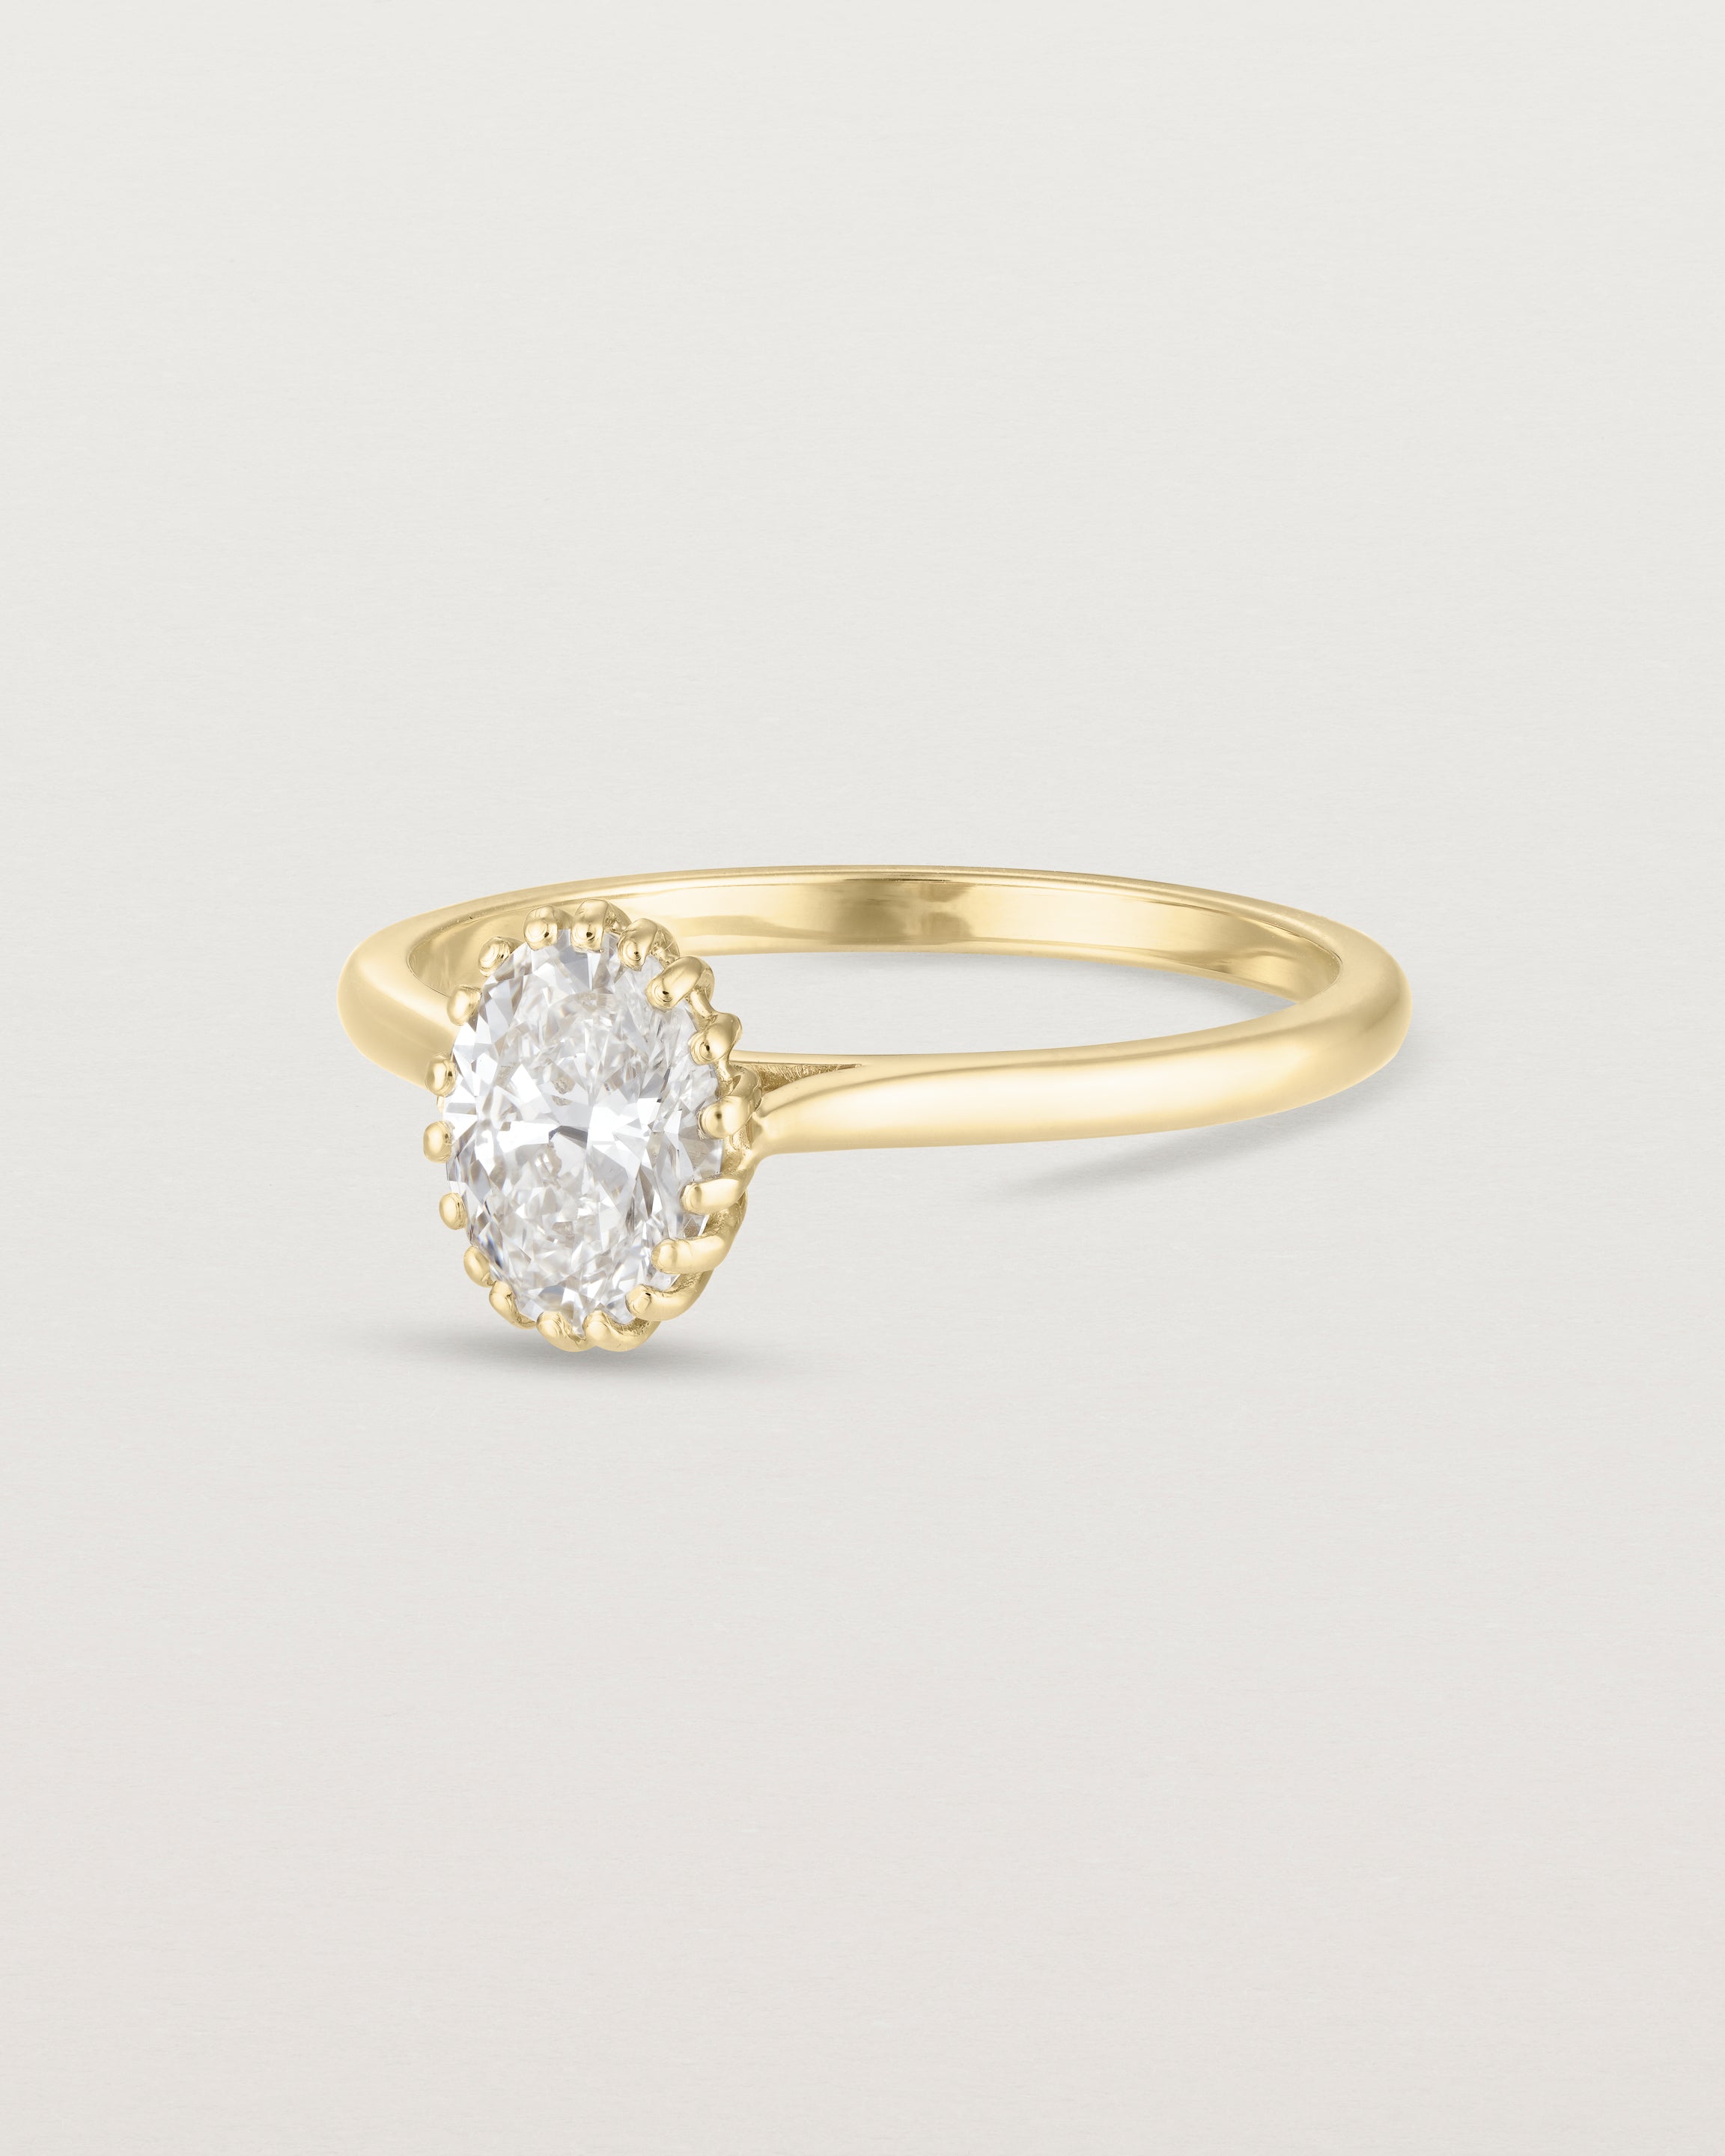 Angled view of the Meroë Oval Solitaire | Laboratory Grown Diamond in yellow gold.